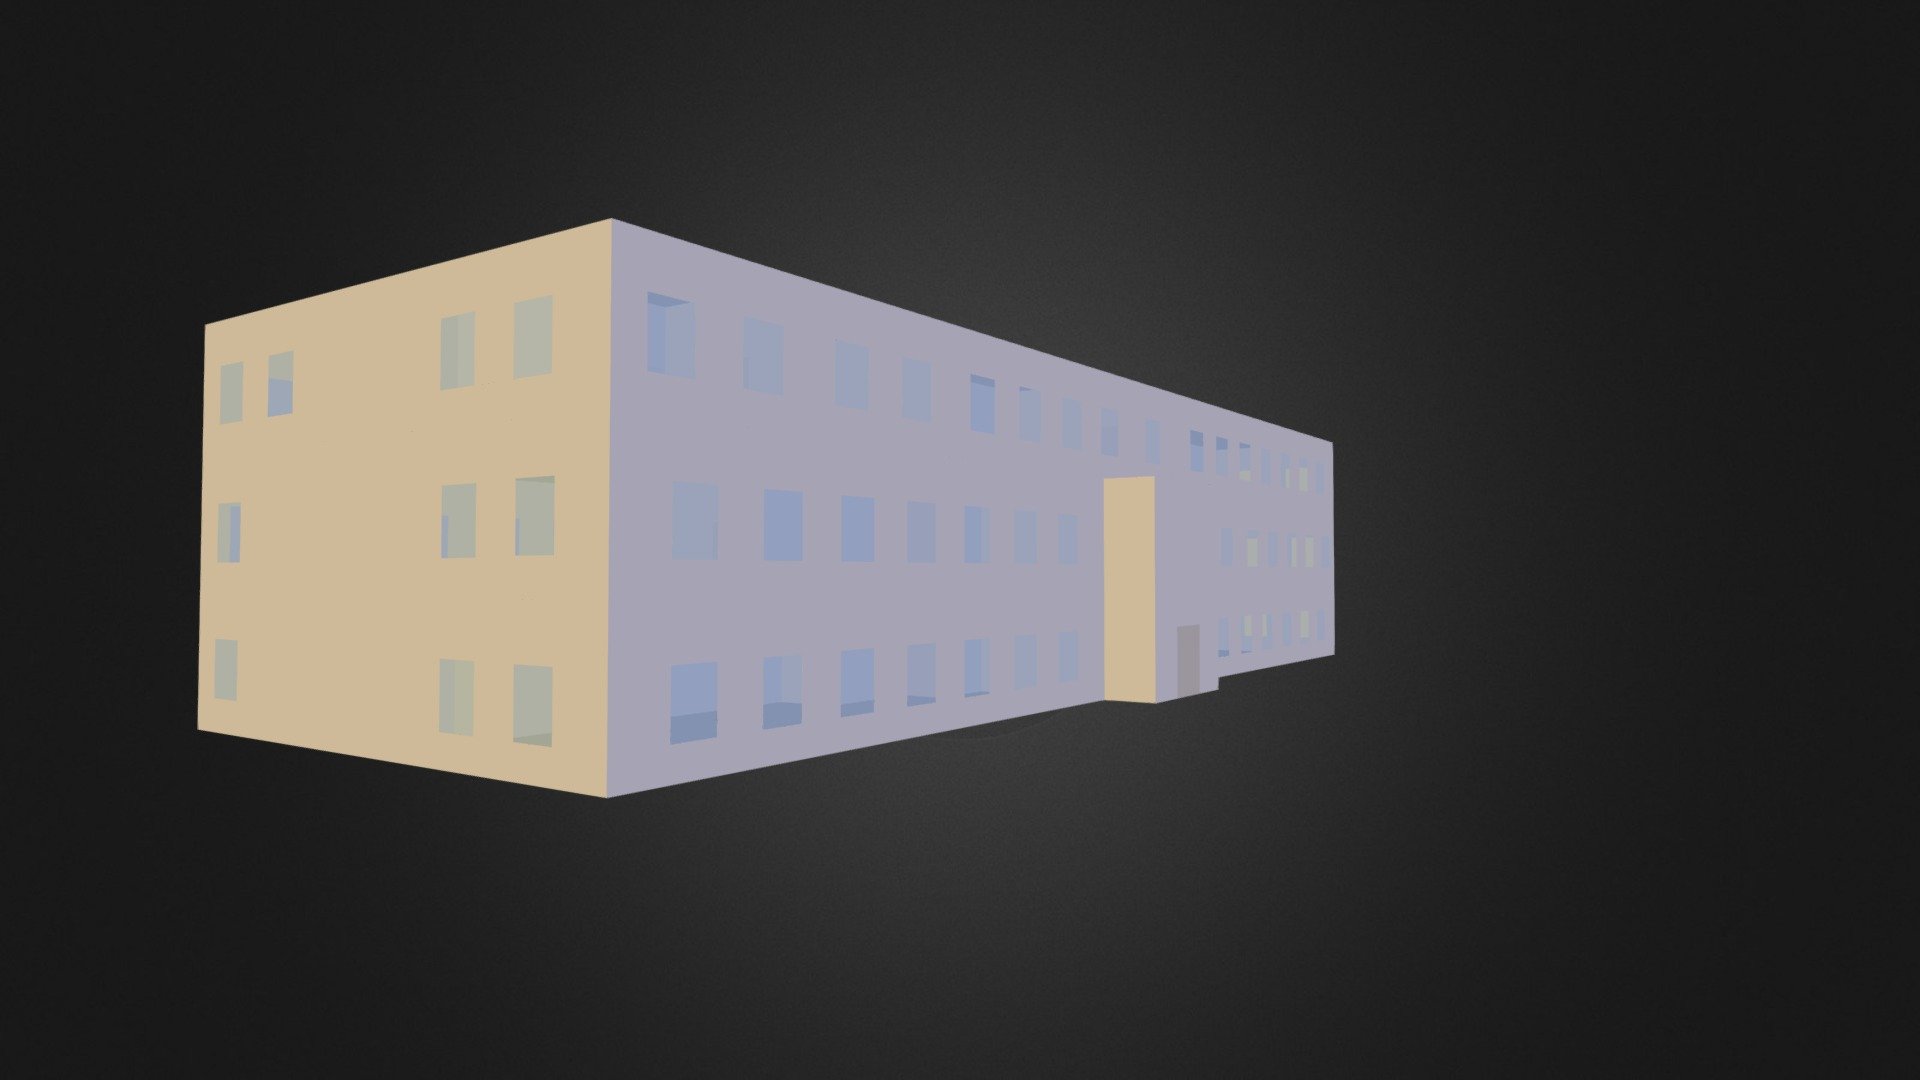 Bâtiment test - 3D model by ManuOp [9mUWtco] - Sketchfab